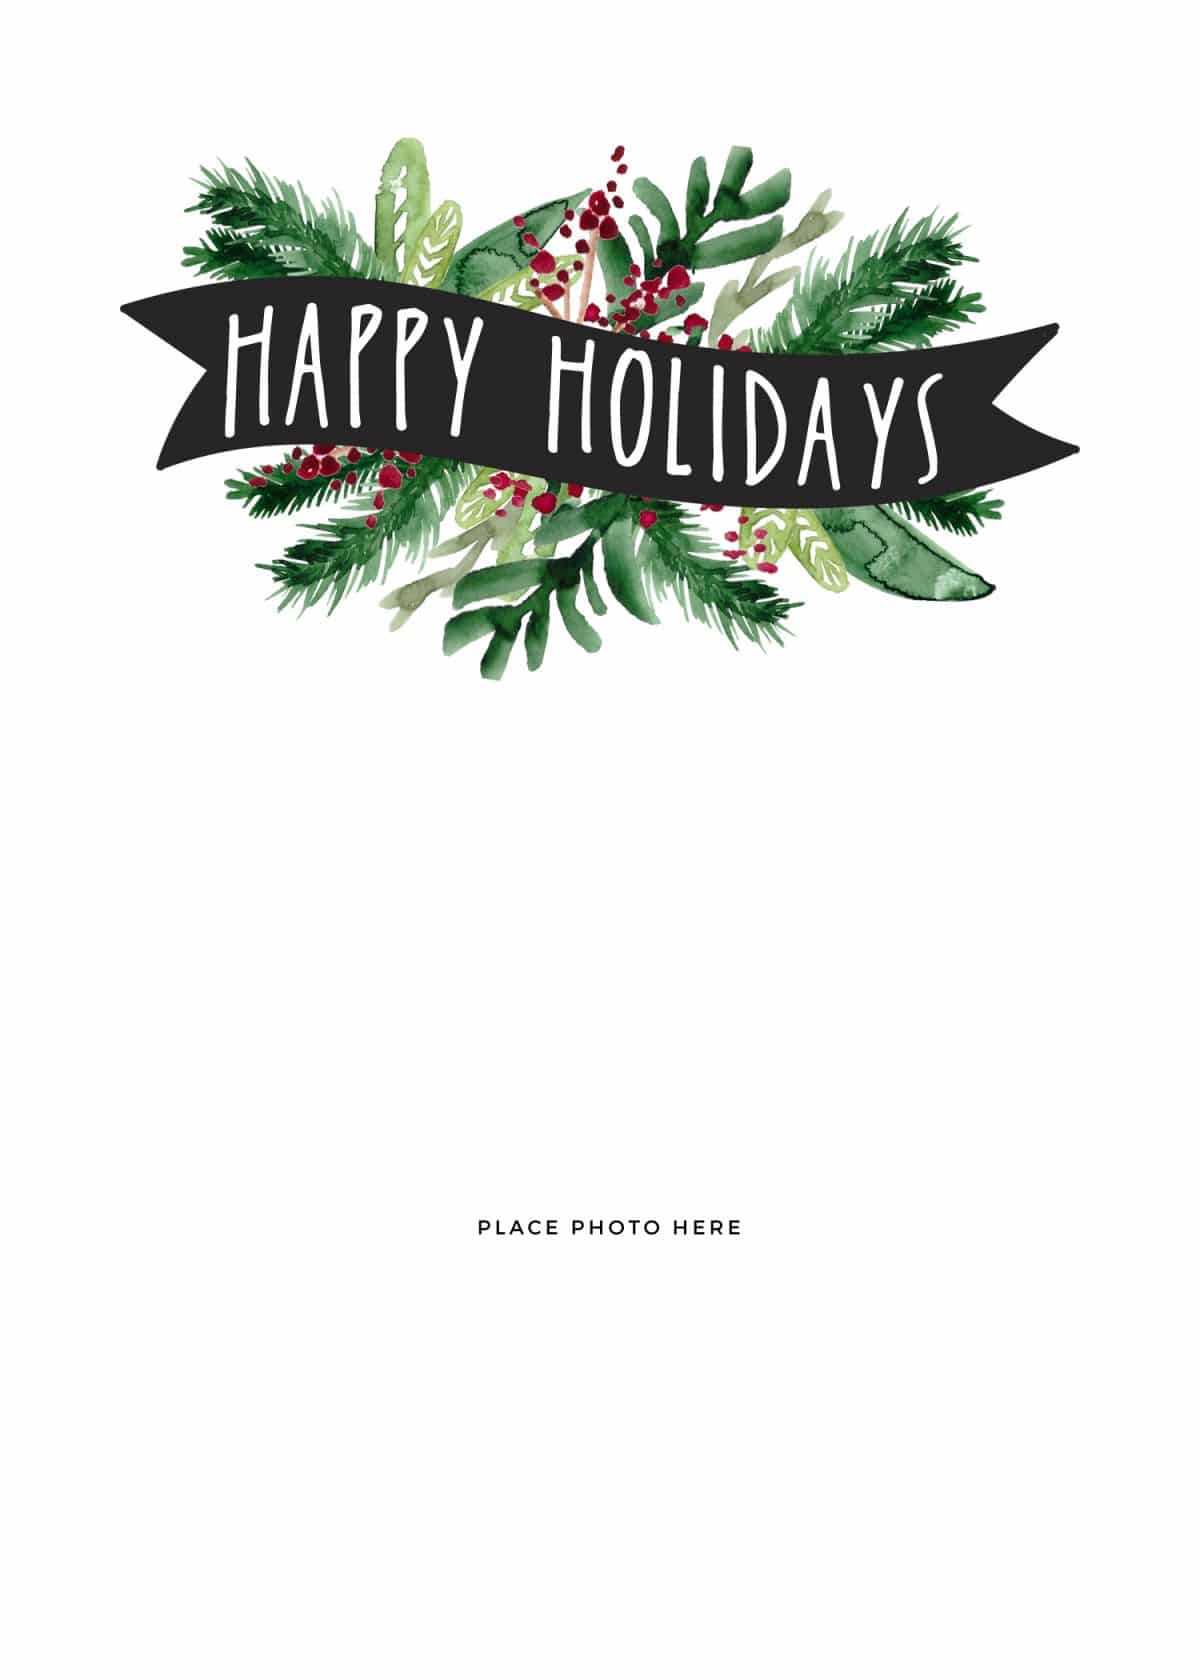 Make Your Own Photo Christmas Cards (For Free!) – Somewhat Throughout Free Holiday Photo Card Templates